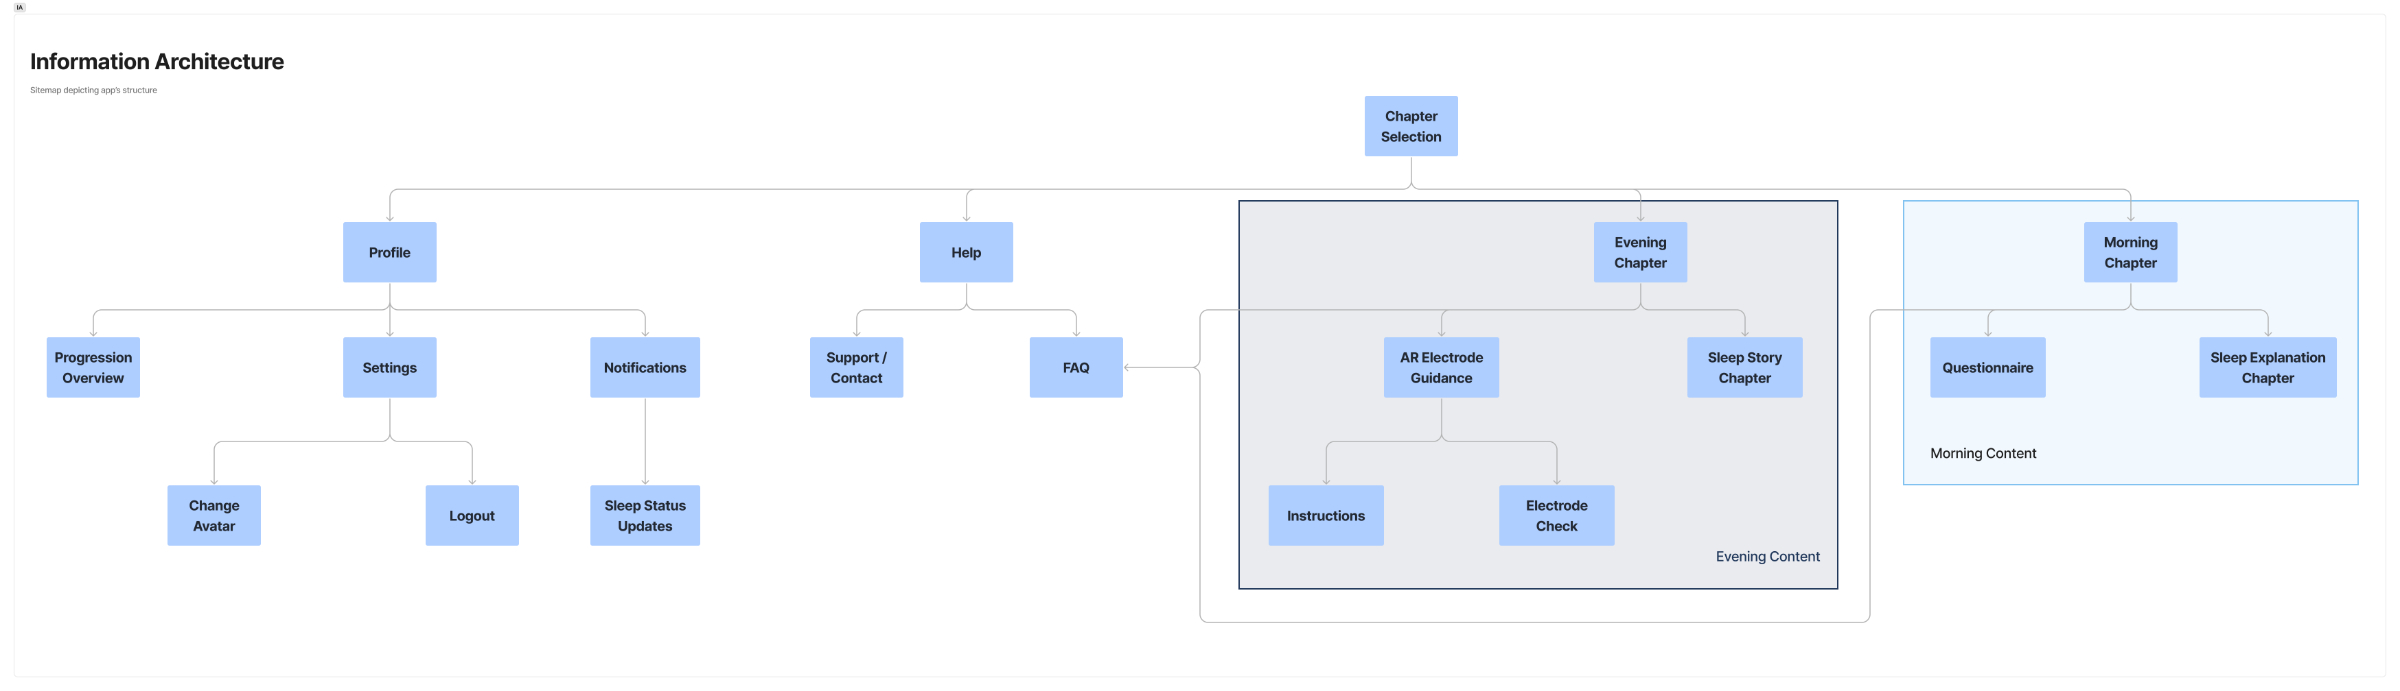 Visual sitemap depicting the app's Information Architecture. Some content is only unlockable in the evening or morning.